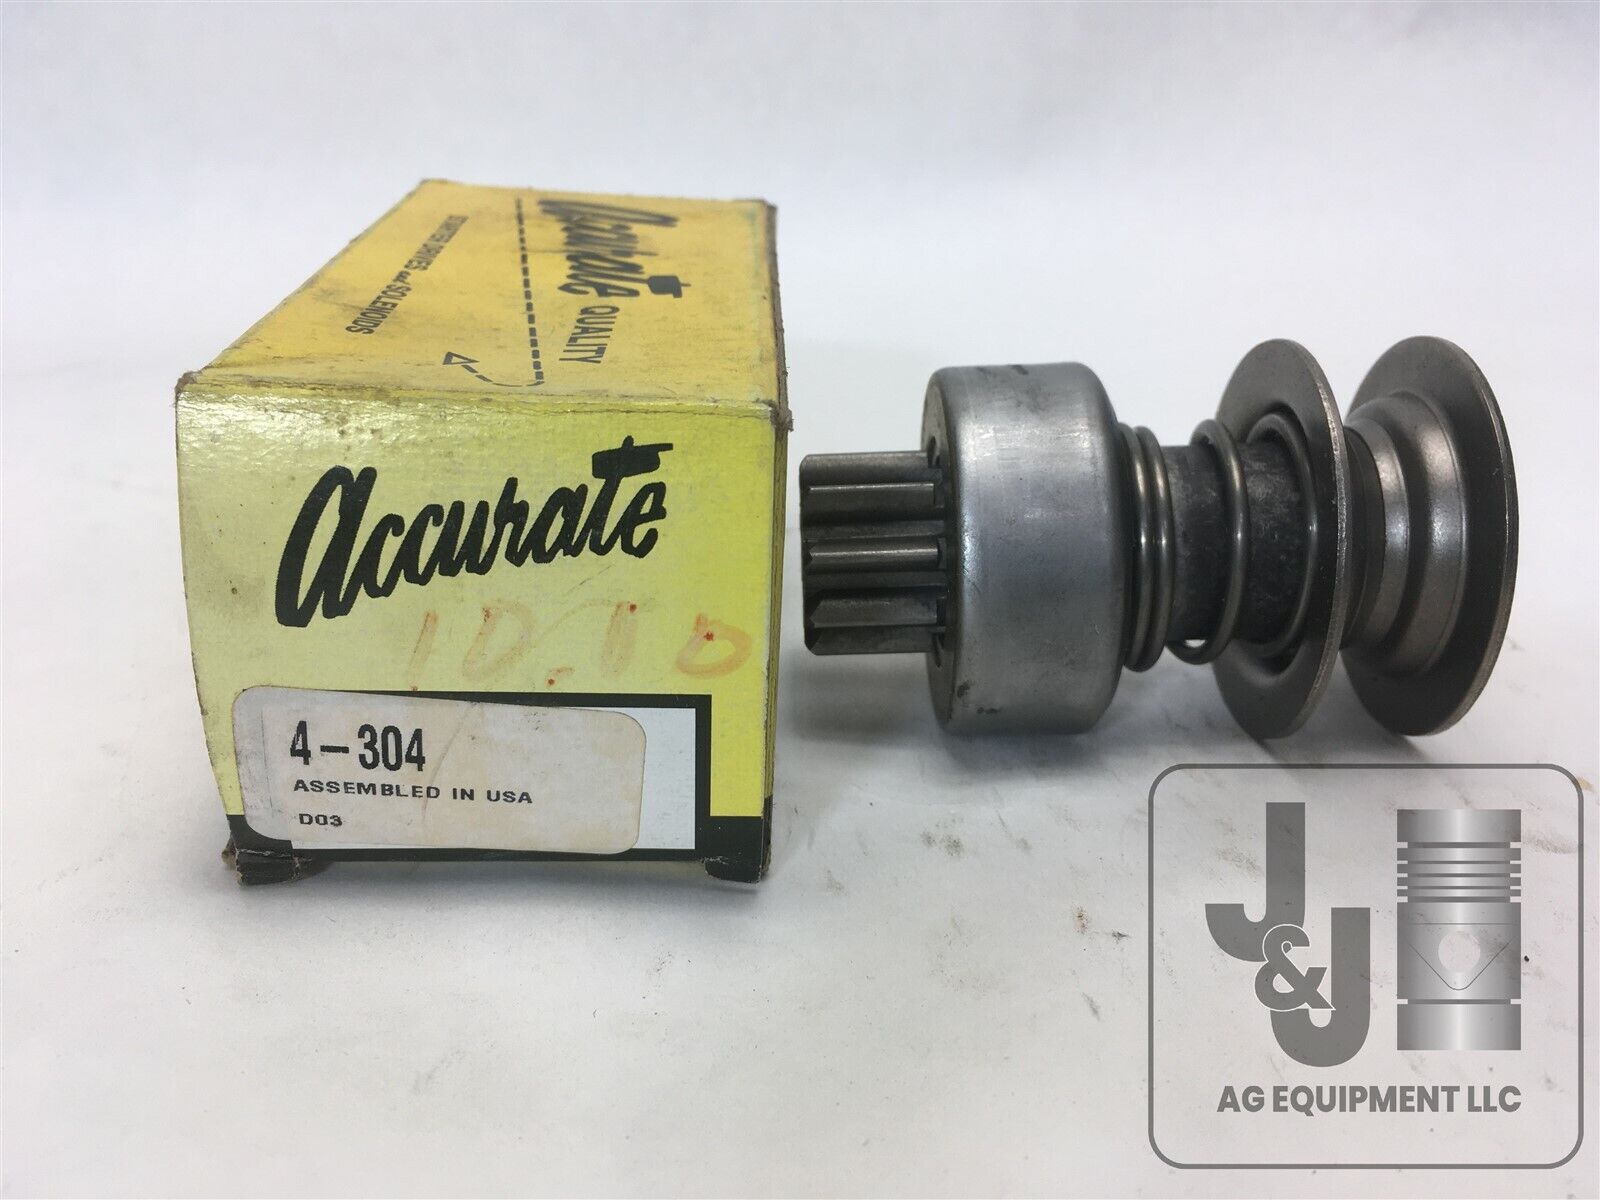 Accurate 9T CW Starter Drive 4-304 DR1900 SD228 SDG228 1932188 1939506  1974355